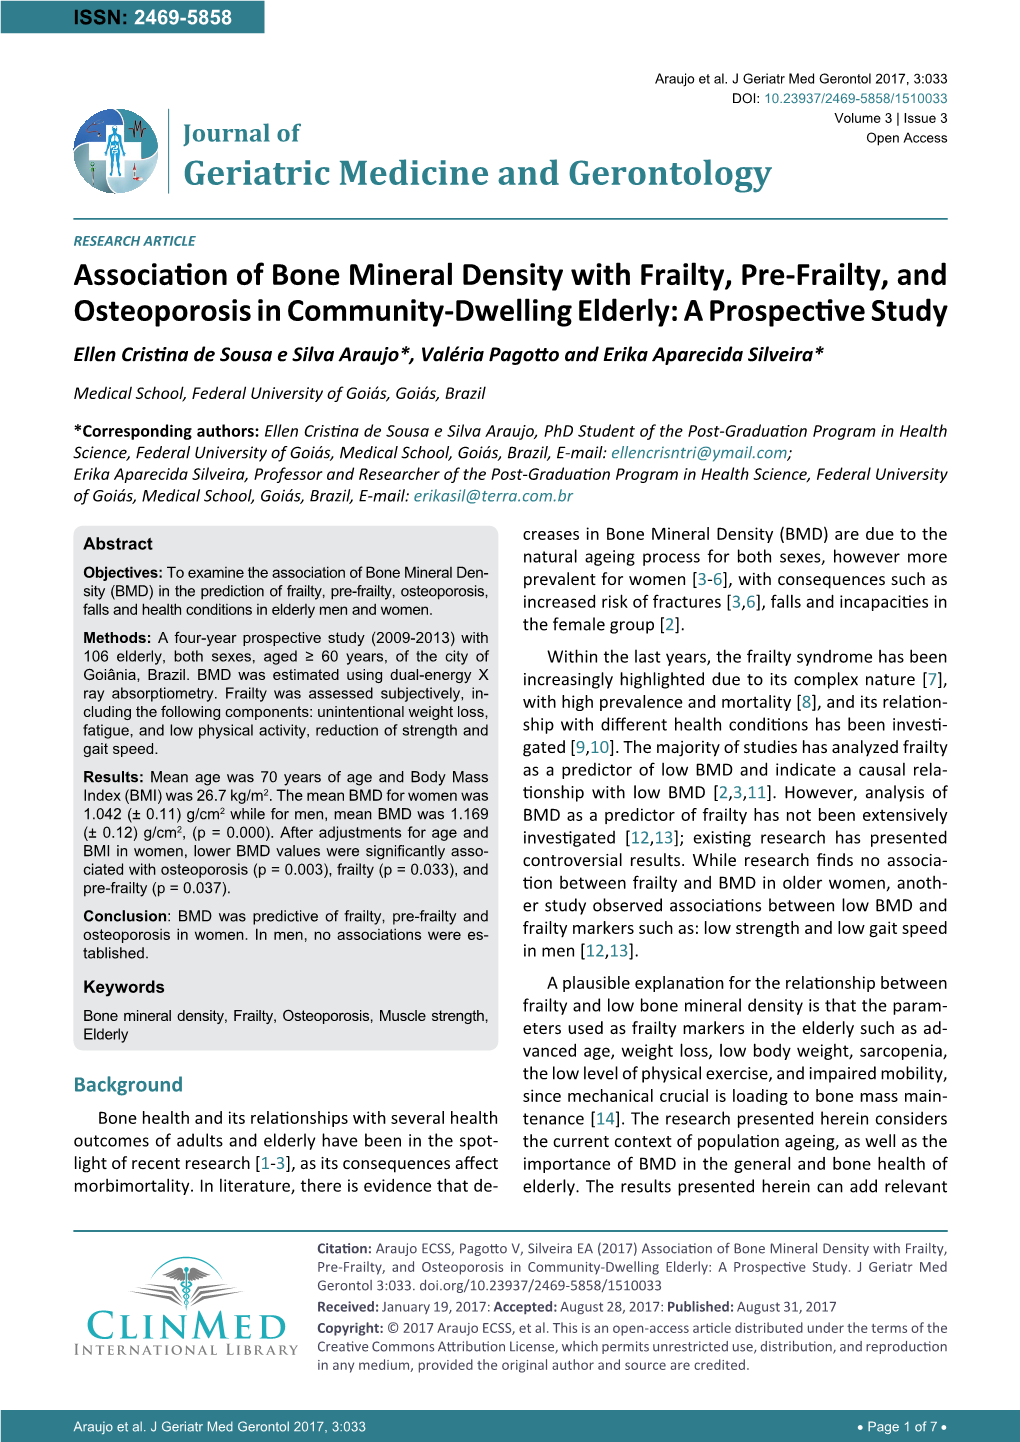 Association of Bone Mineral Density with Frailty, Pre-Frailty, and Osteoporosis in Community-Dwelling Elderly: a Prospective